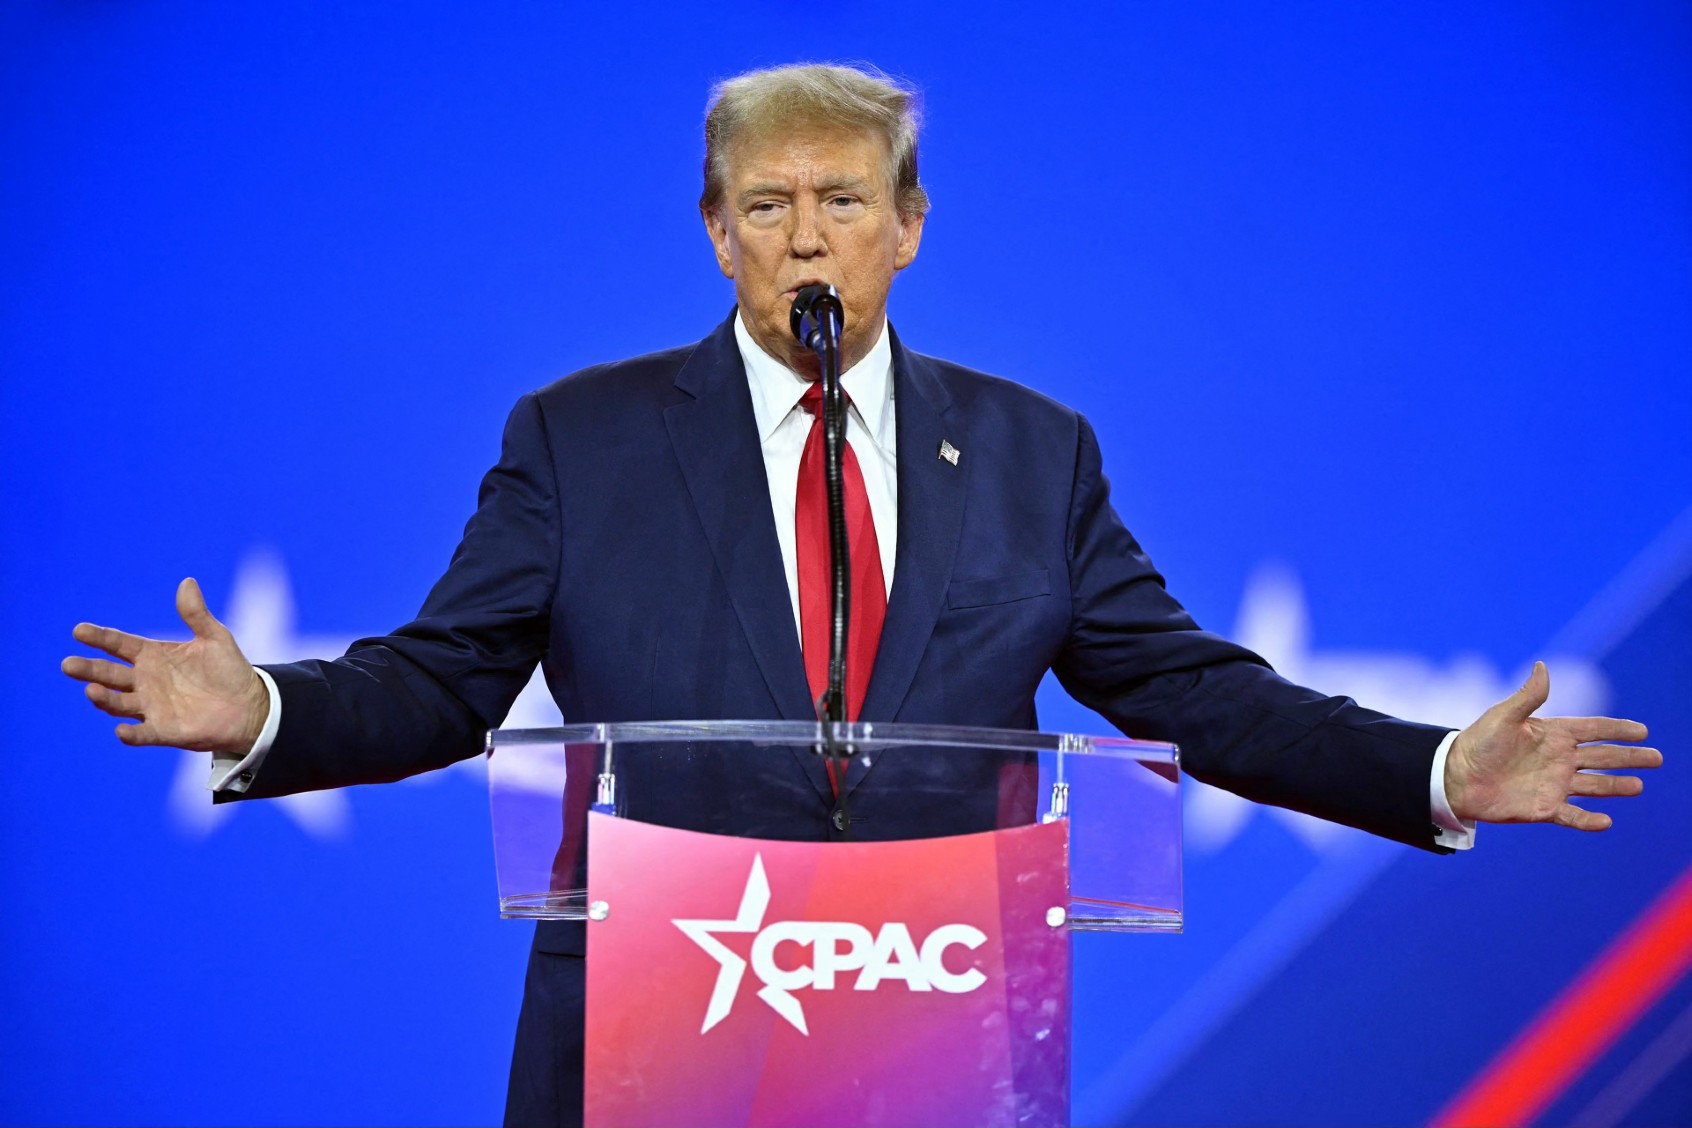 trump compares migrants to hannibal lecter in bizarre cpac rant